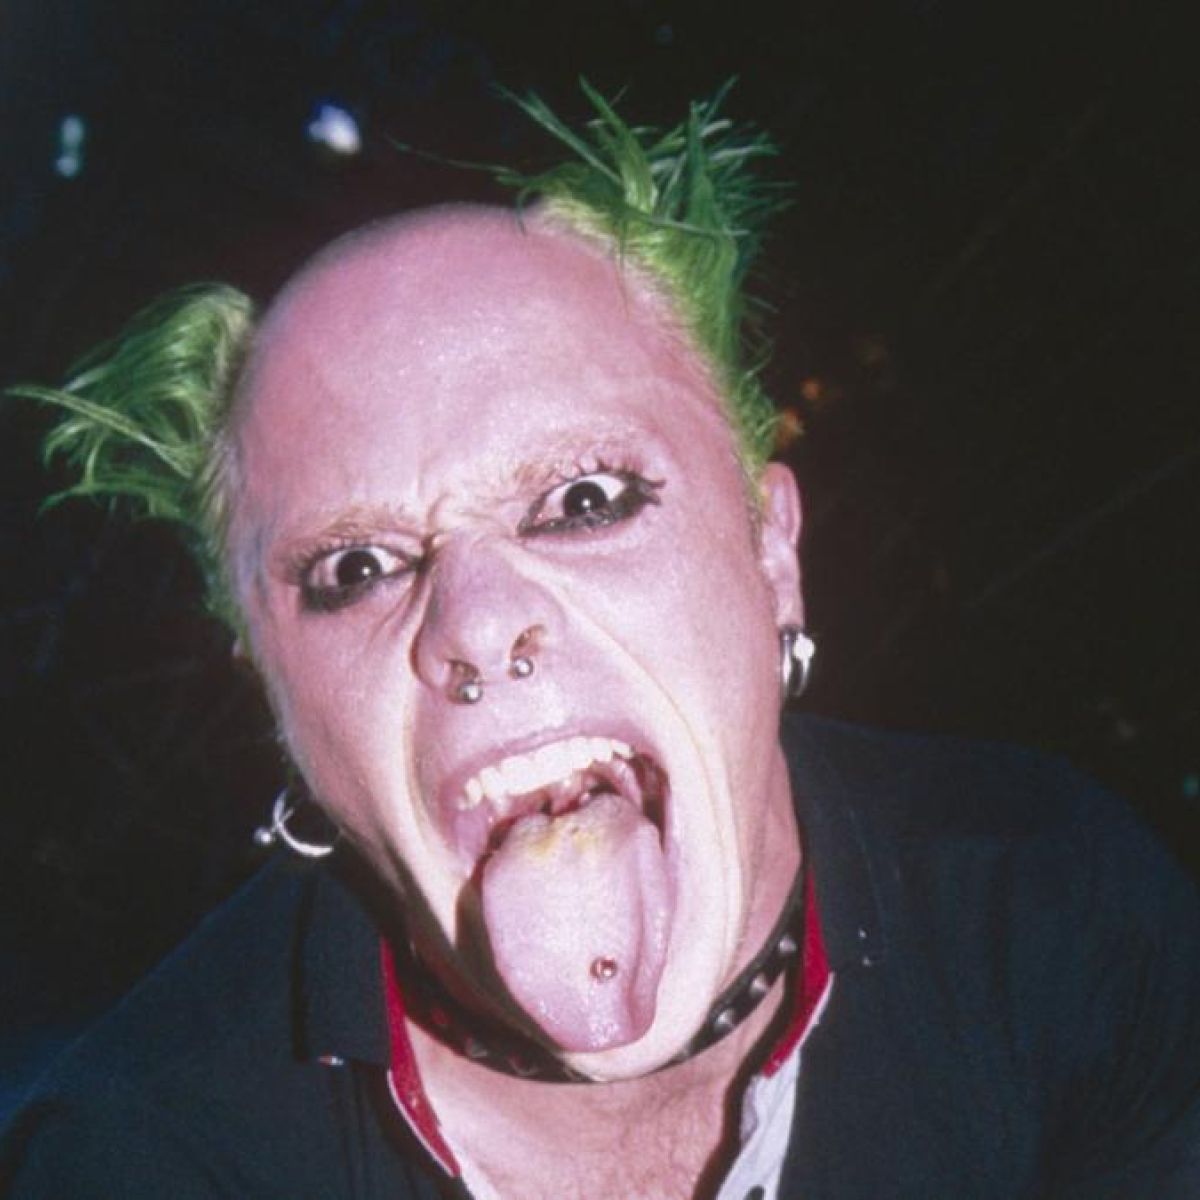 The Prodigy S Keith Flint Rat King Of The Sewers Of Music